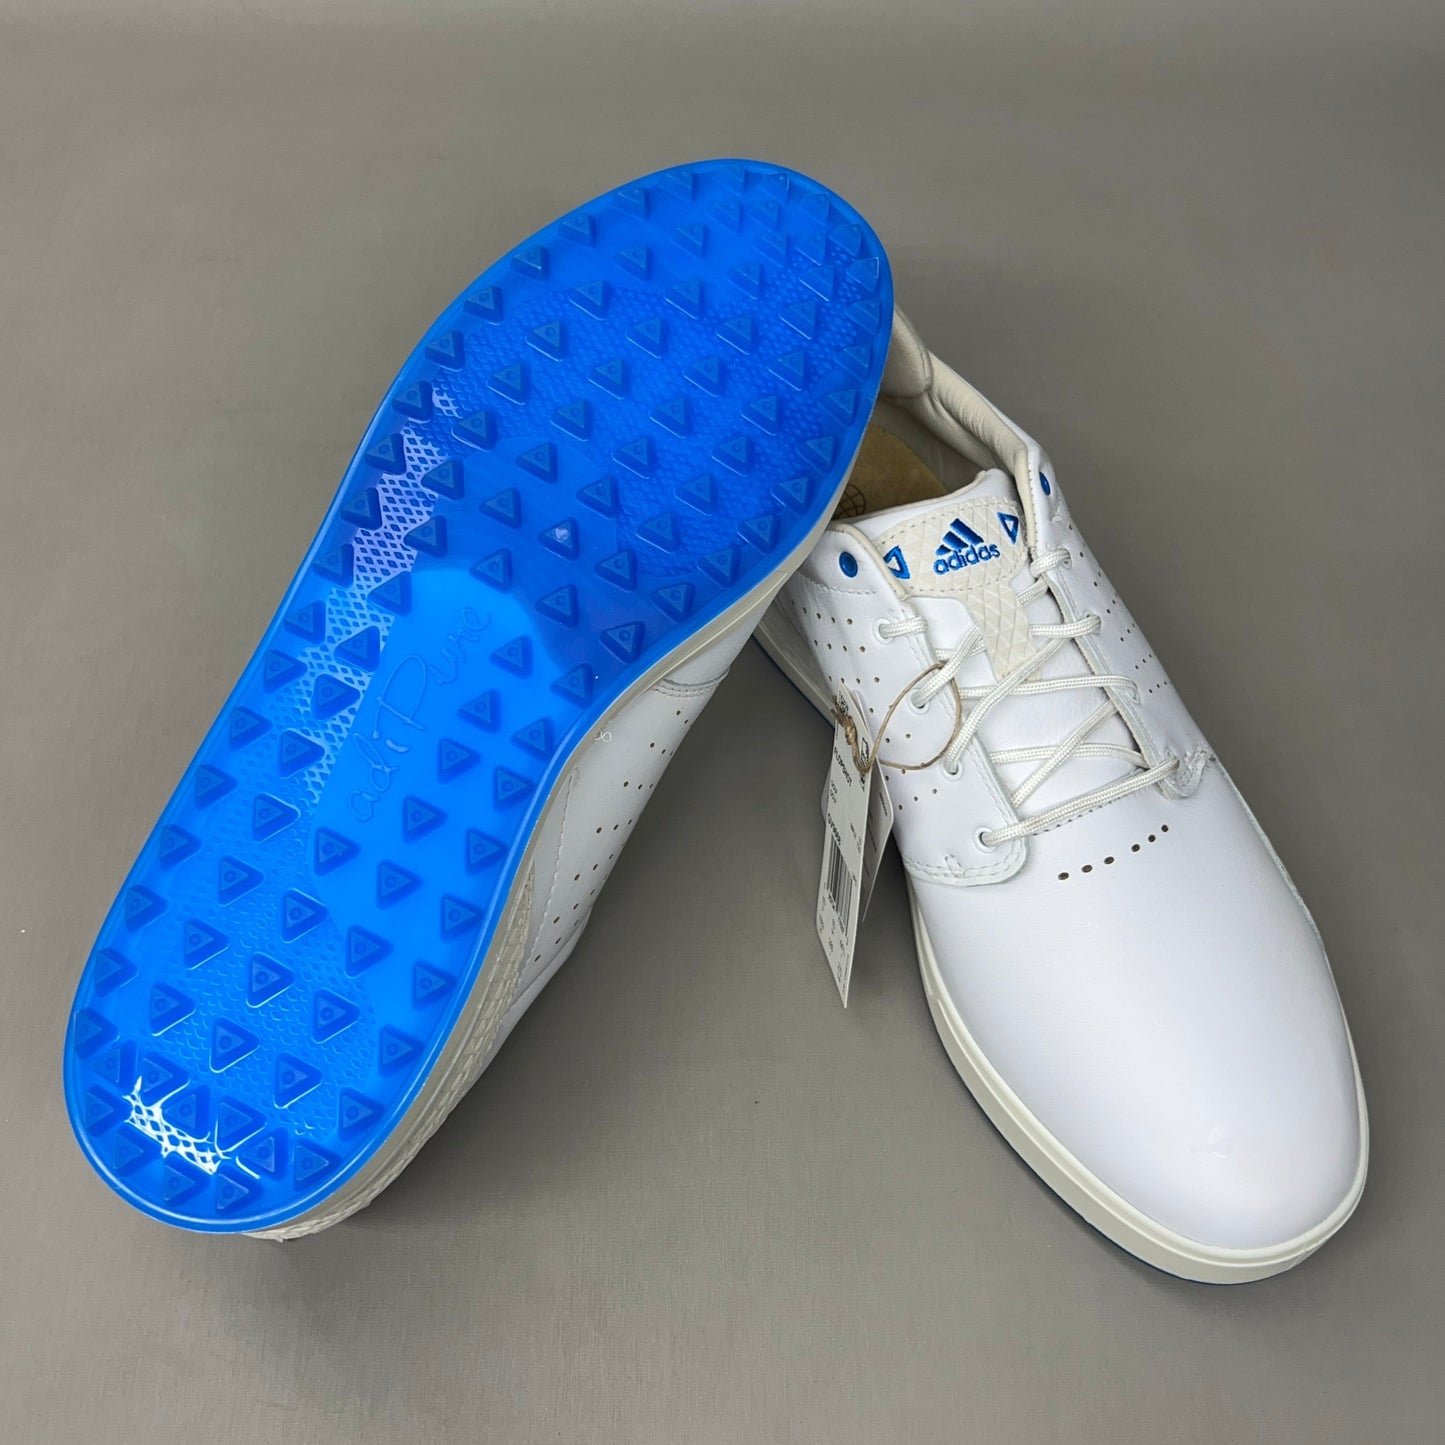 ADIDAS Flopshot Golf Shoes Waterproof Leather Men's Sz 10.5 White / Gold / Blue GV9668 (New)